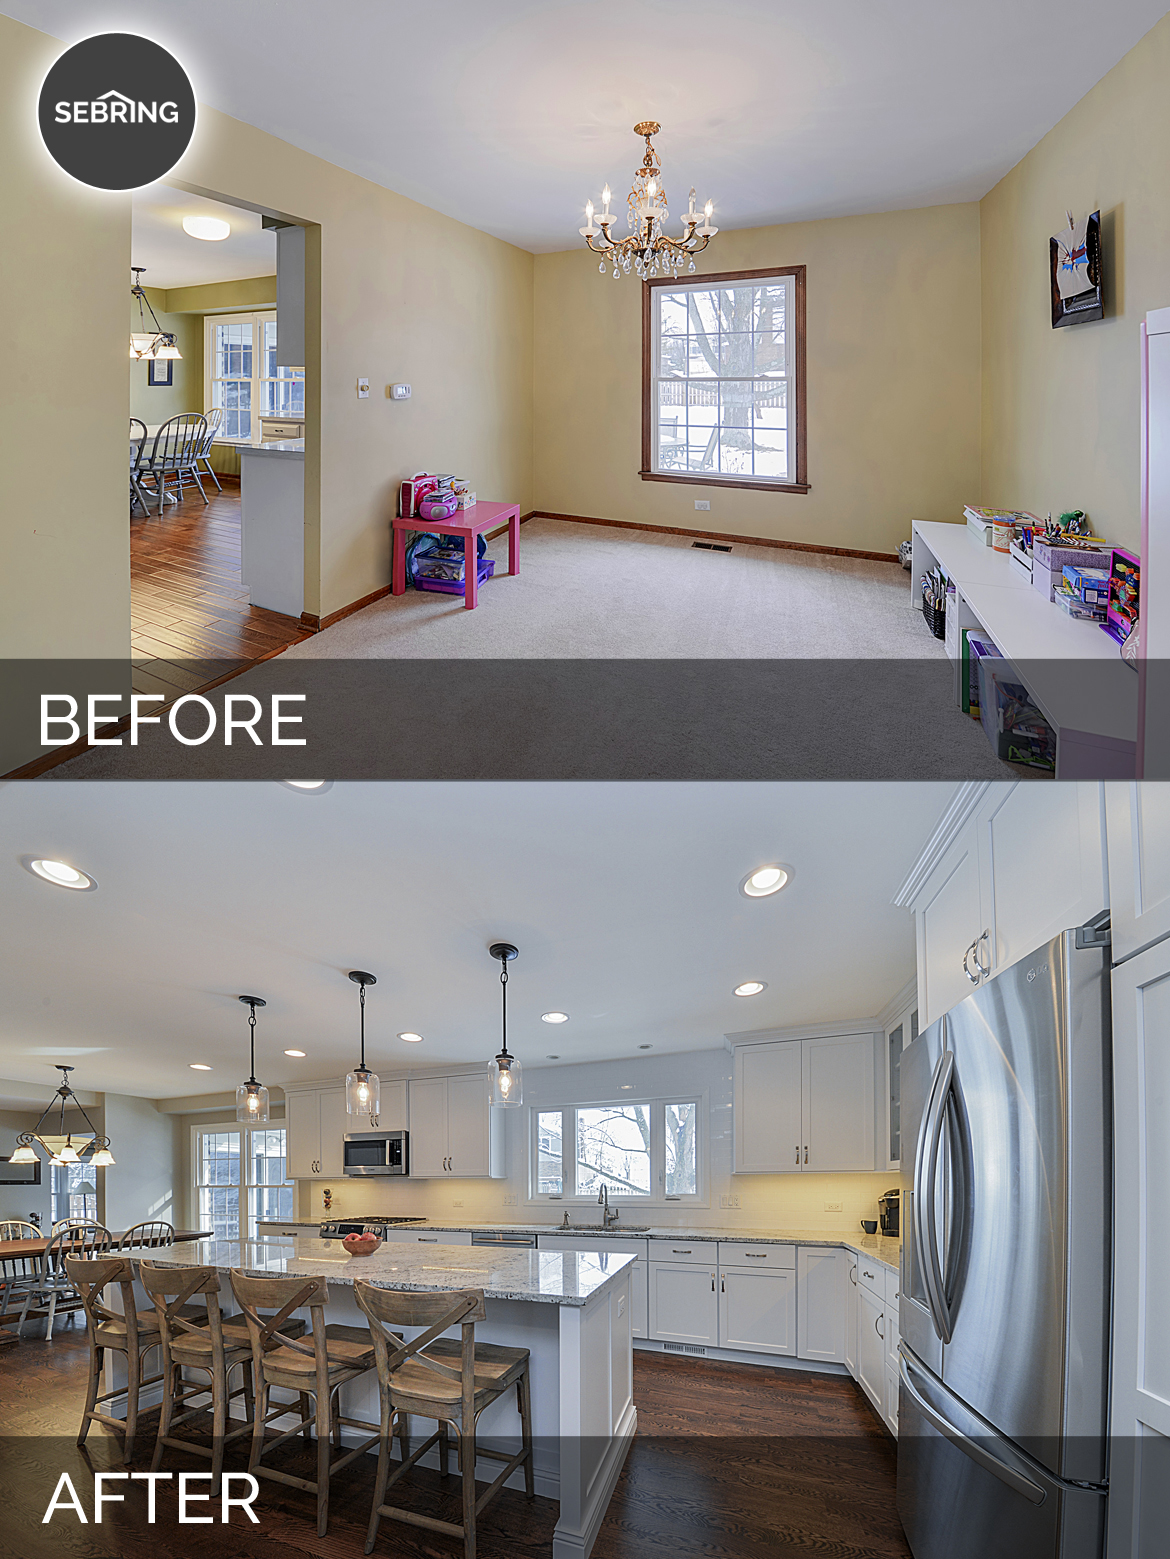 Ryan & Missy's Kitchen Before & After Pictures Luxury